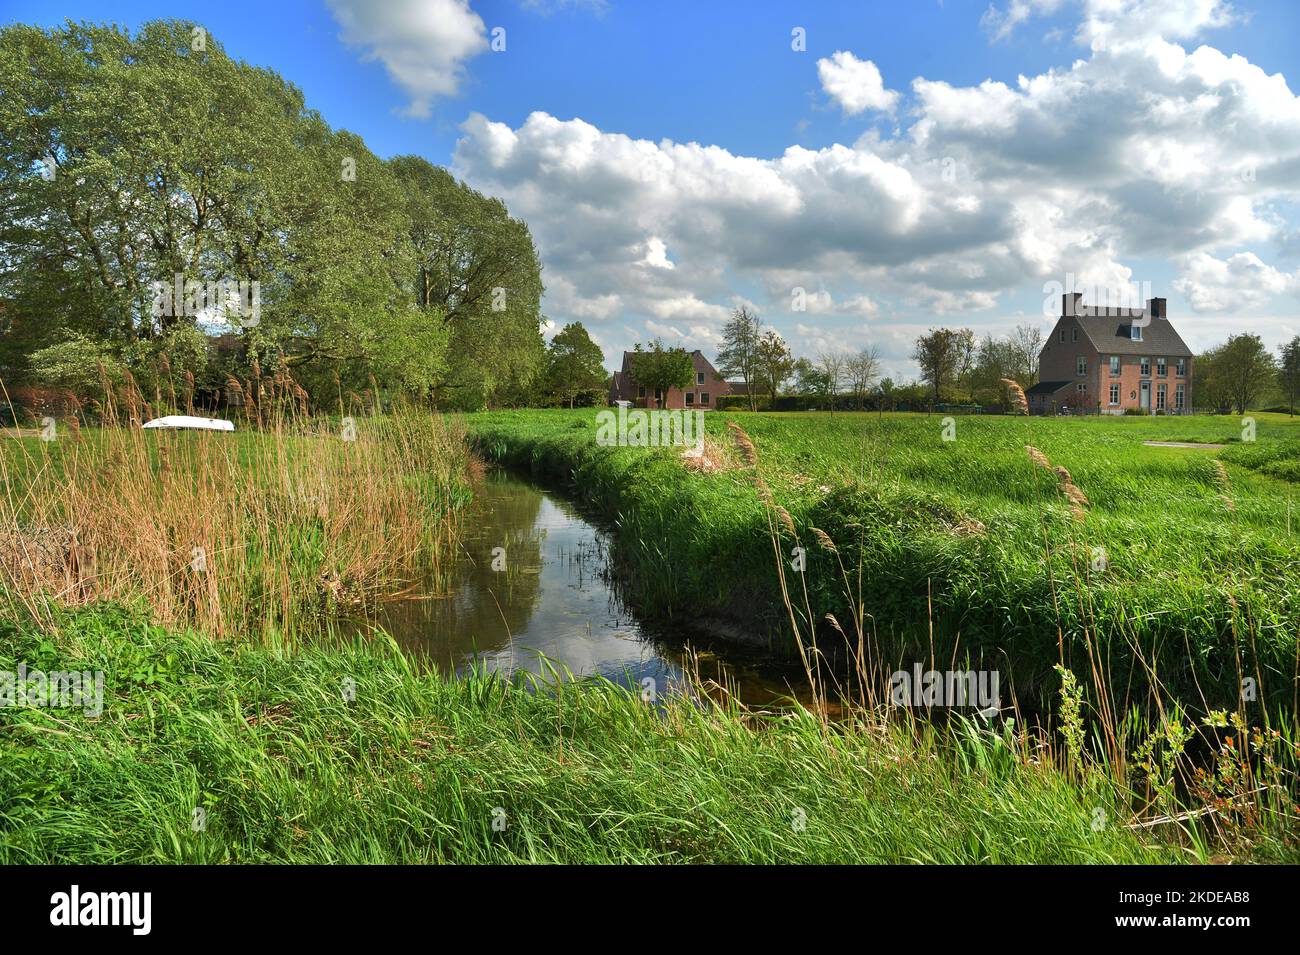 The municipality of Voorschoten near The Hague. Country and People on 25.4.2018, NDL, Netherlands Stock Photo